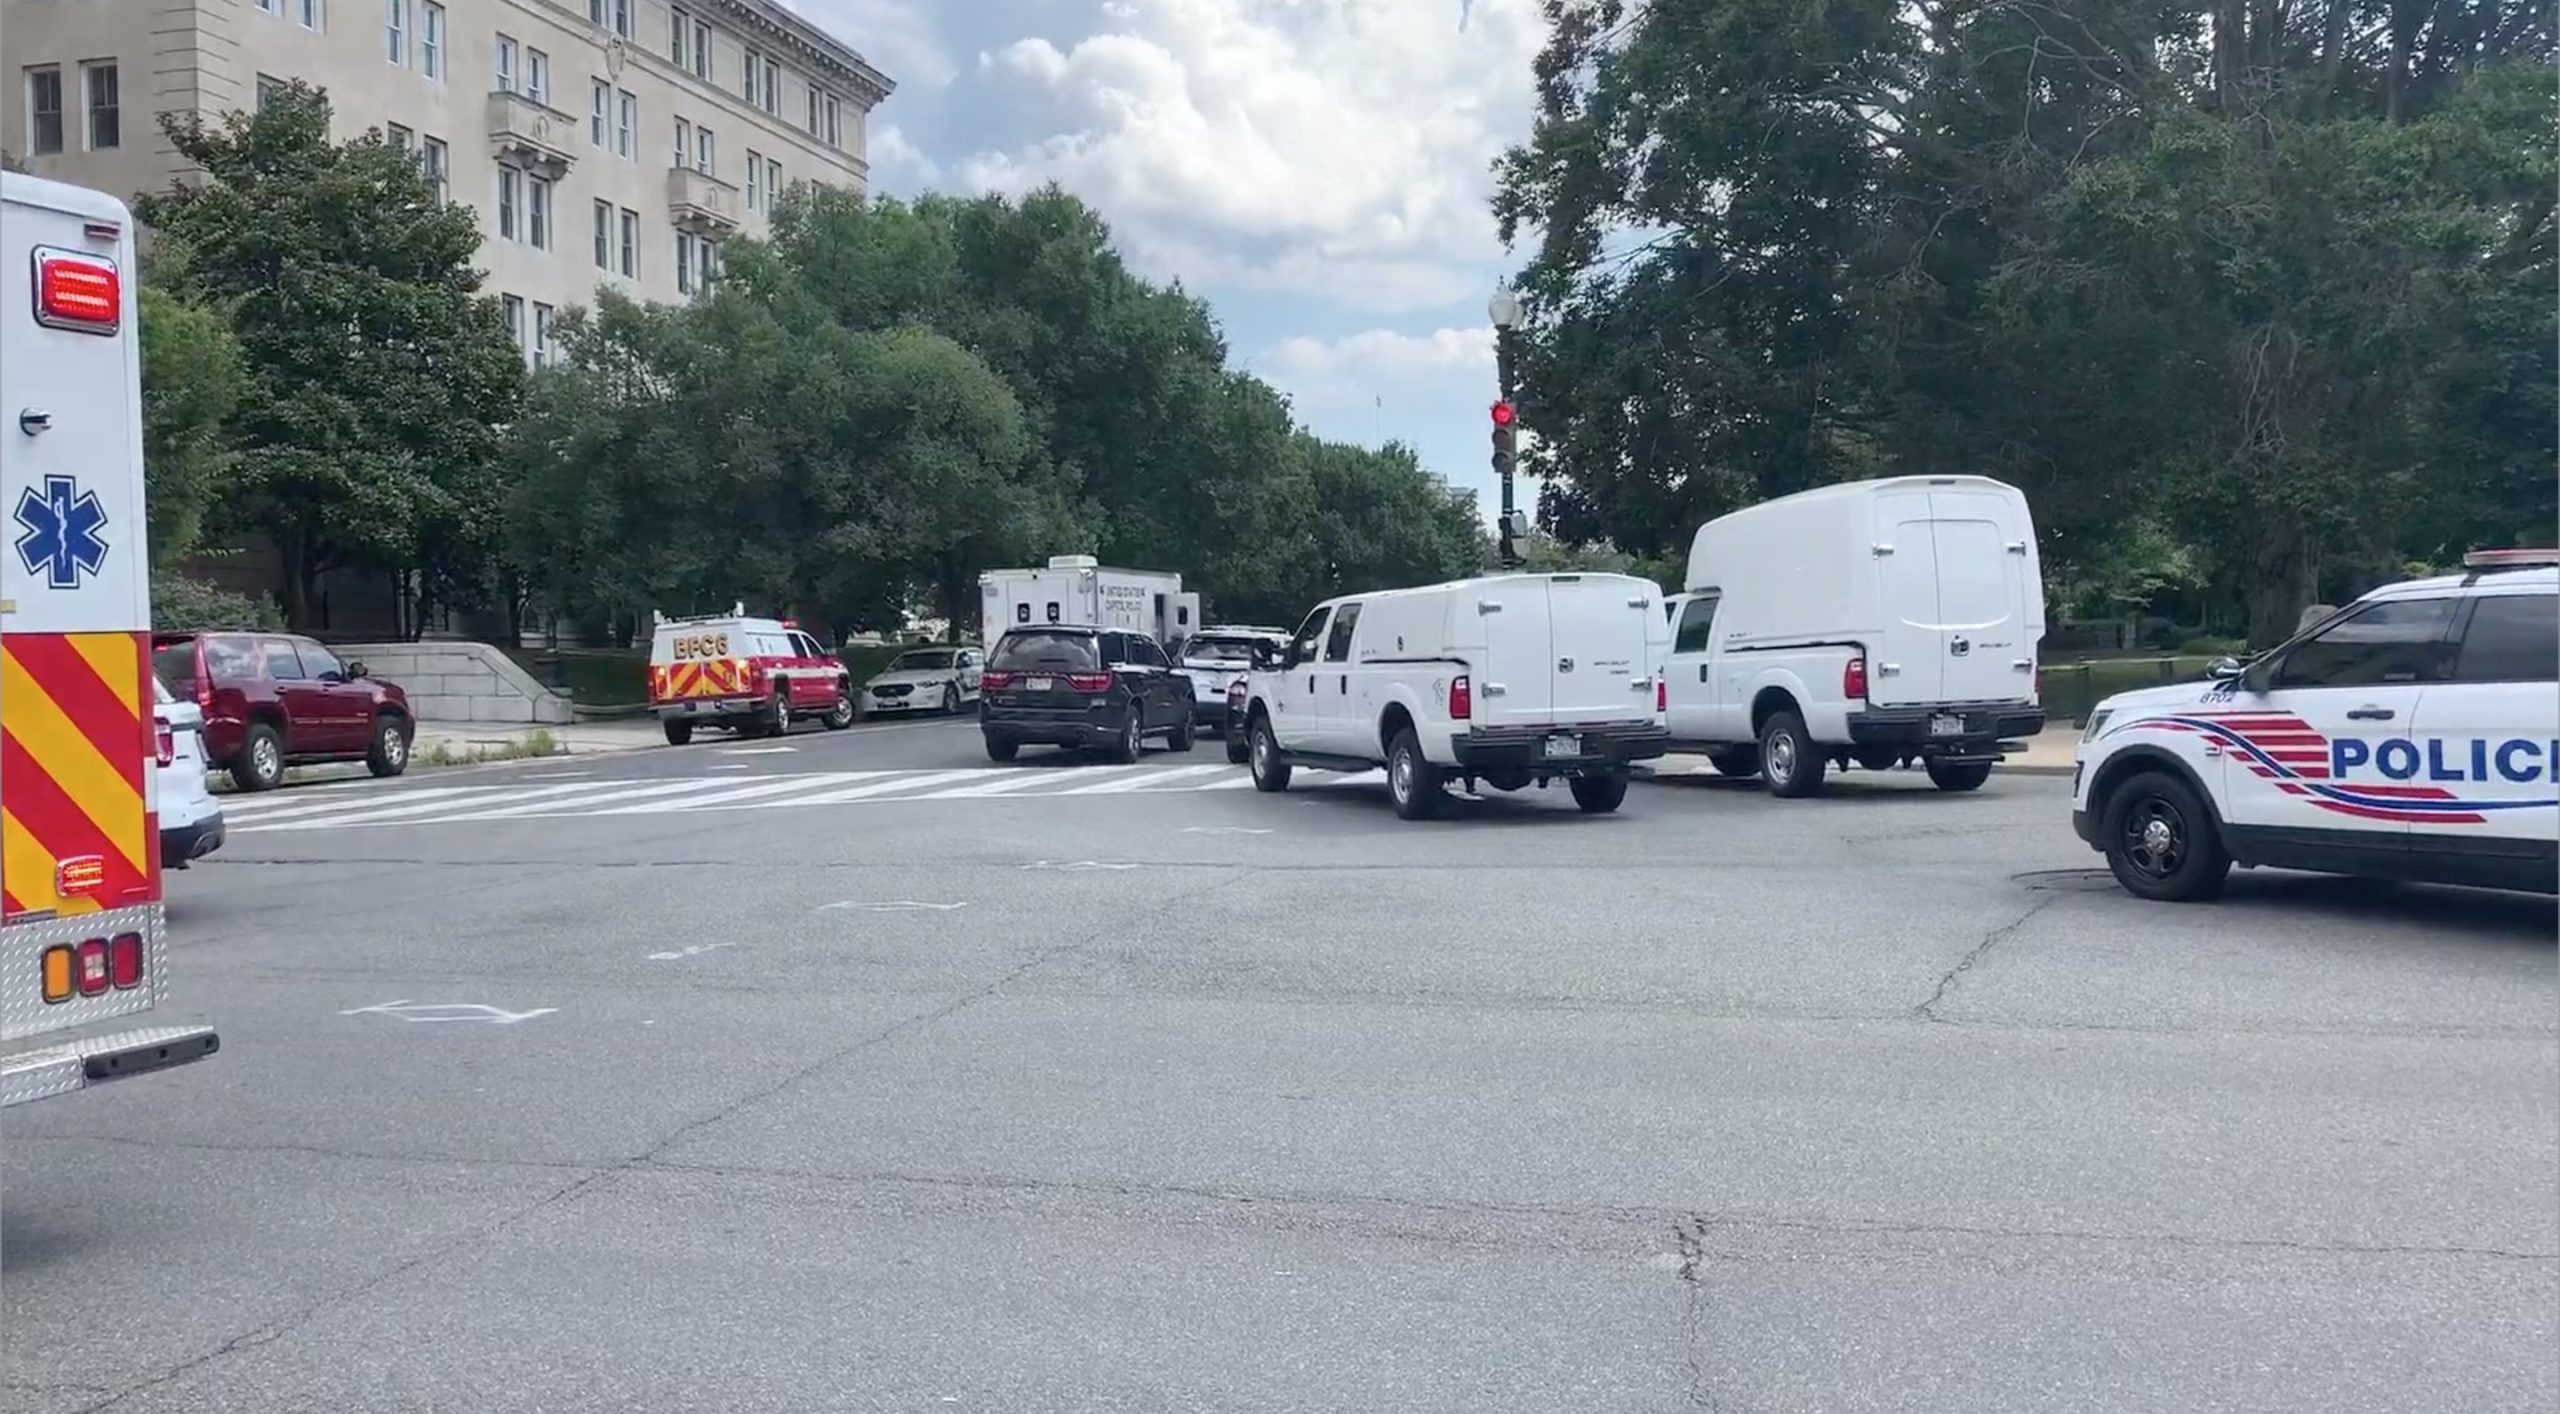 Emergency vehicles respond to the arson of three police cars in front of the U.S. Supreme Court in July. (WUSA/Video screenshot)